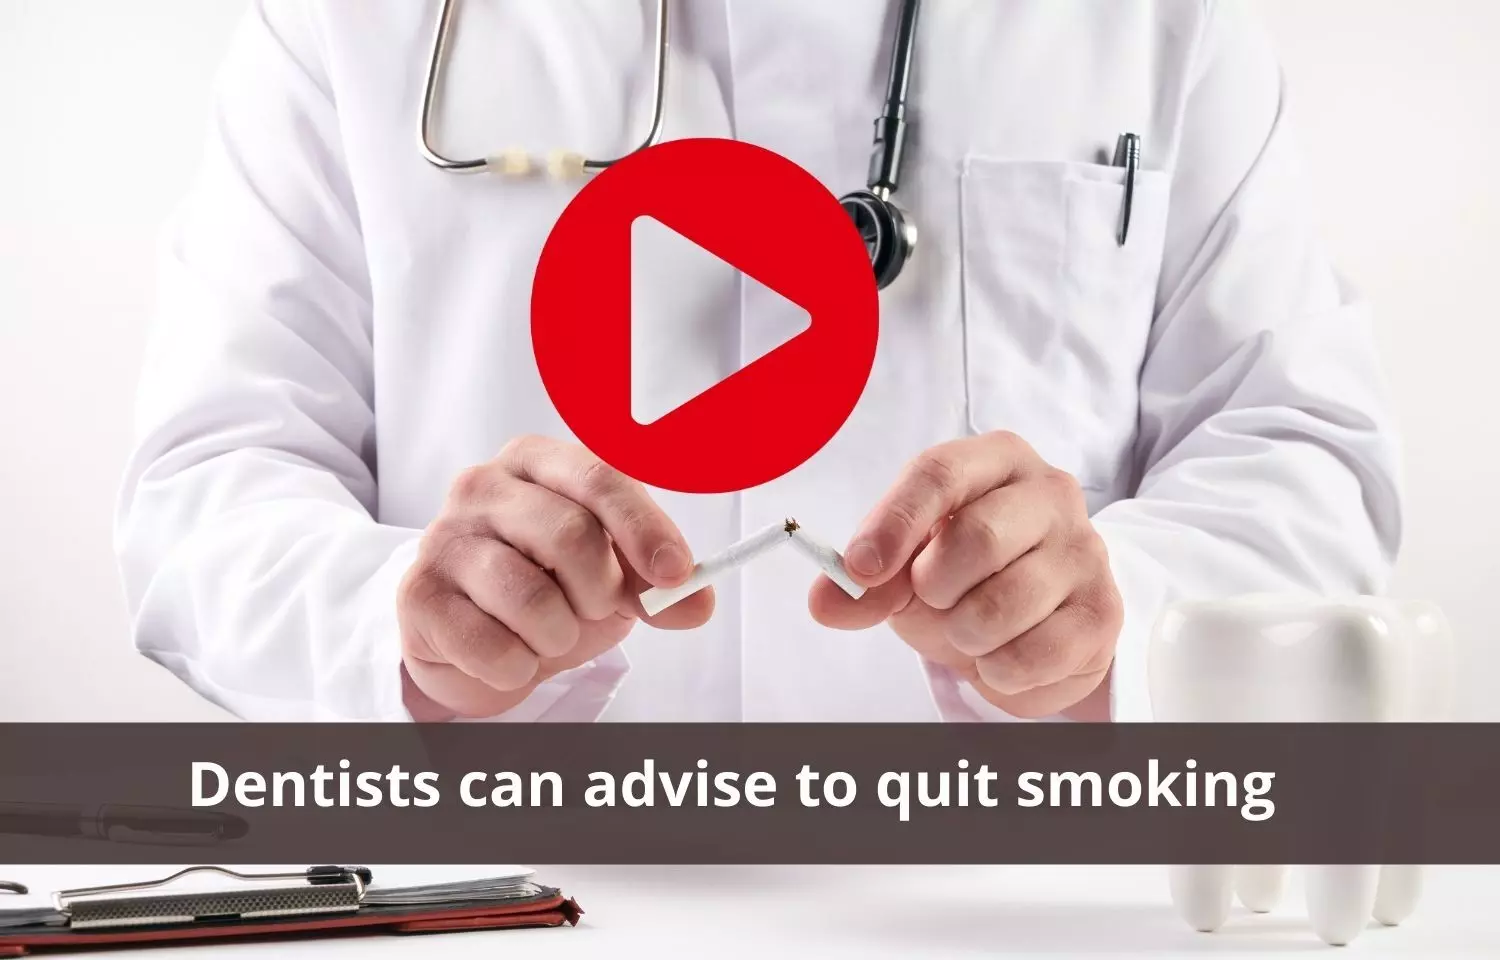 Dentists advise on quitting smoking is beneficial